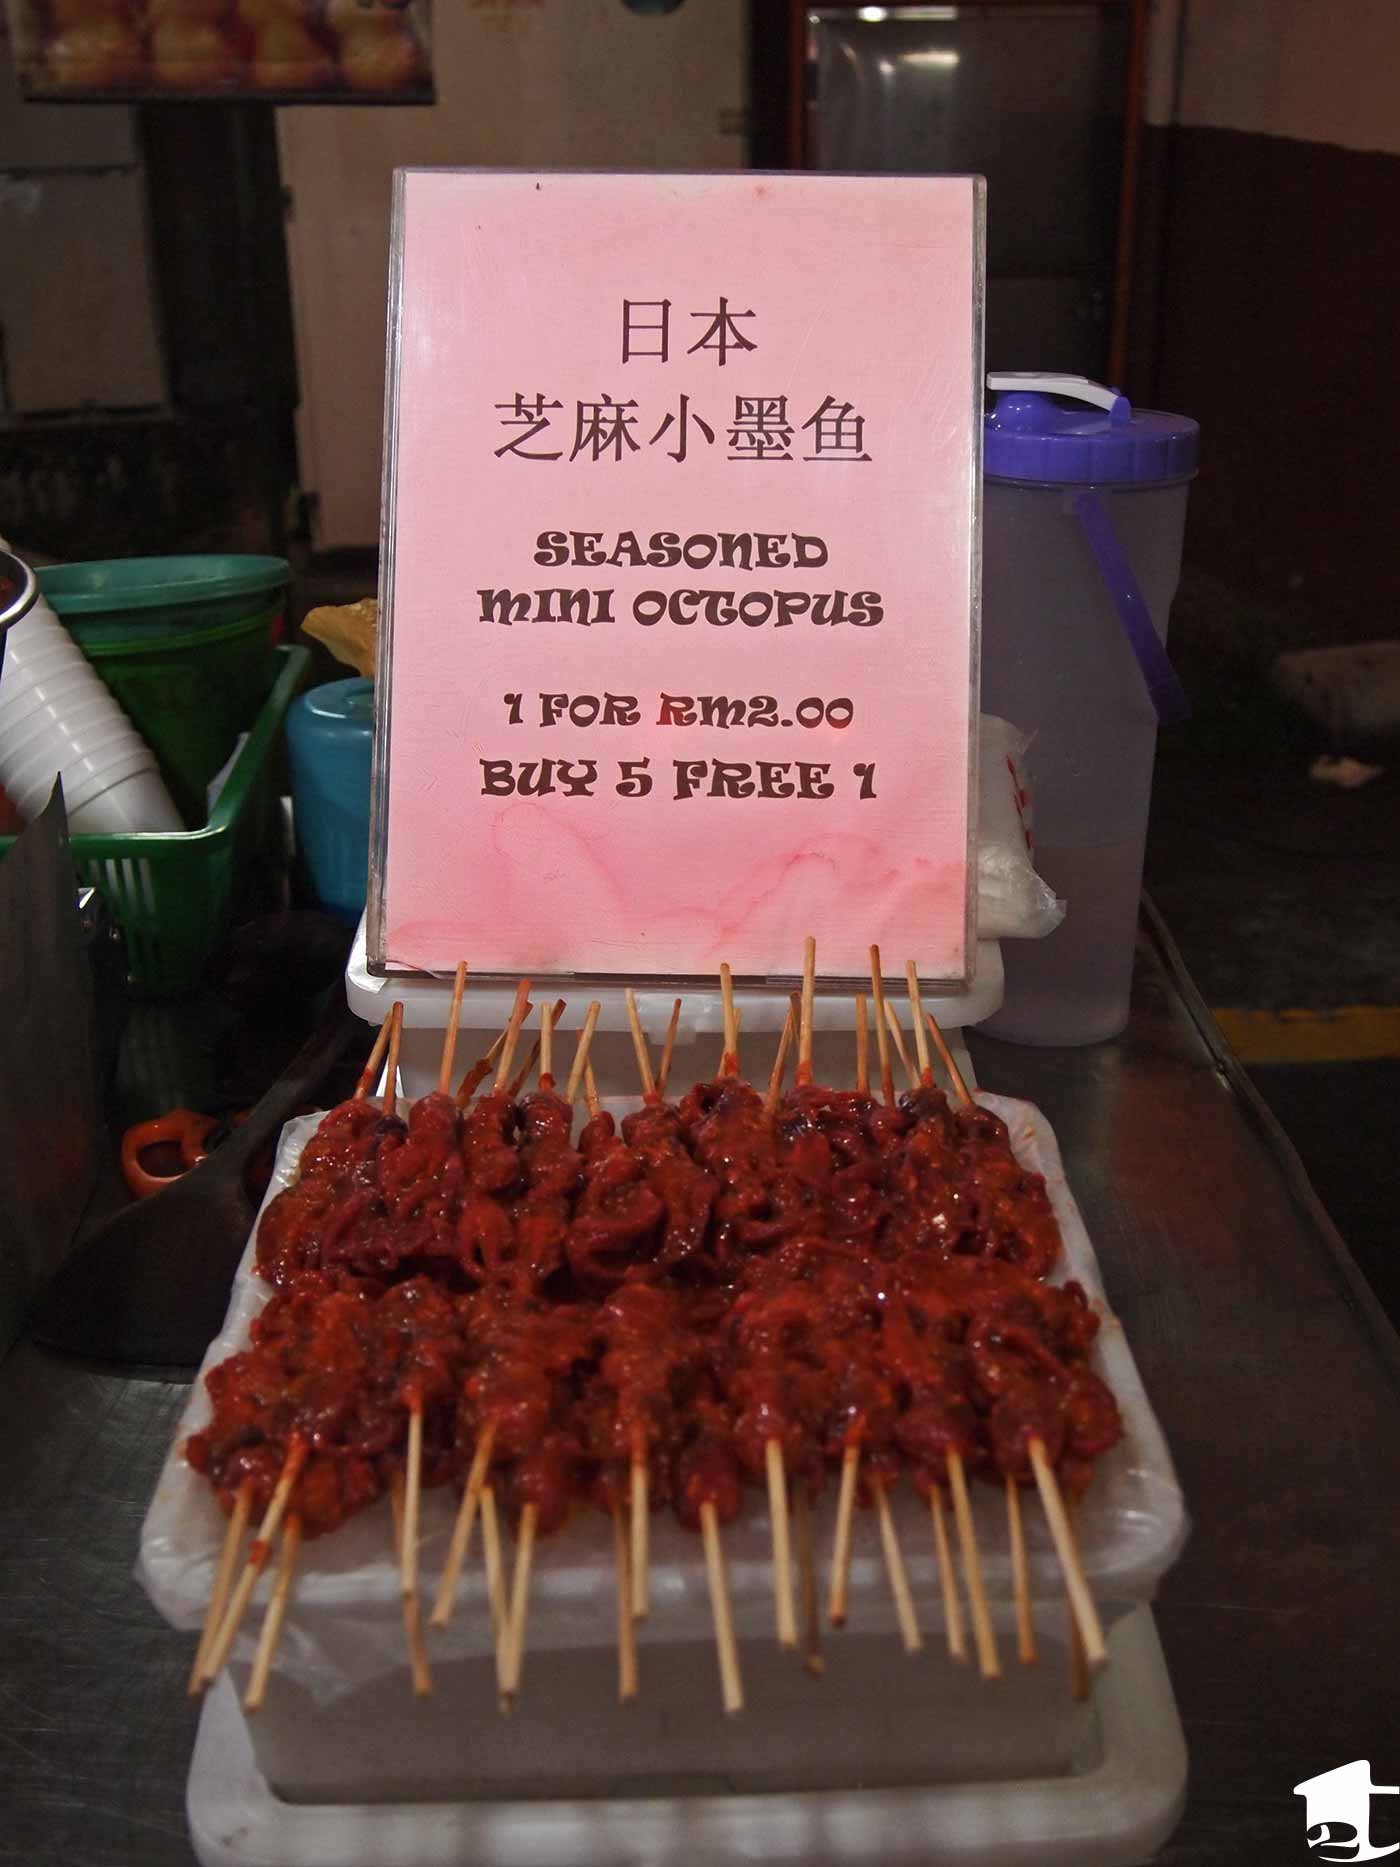 Baby octopus on a stick